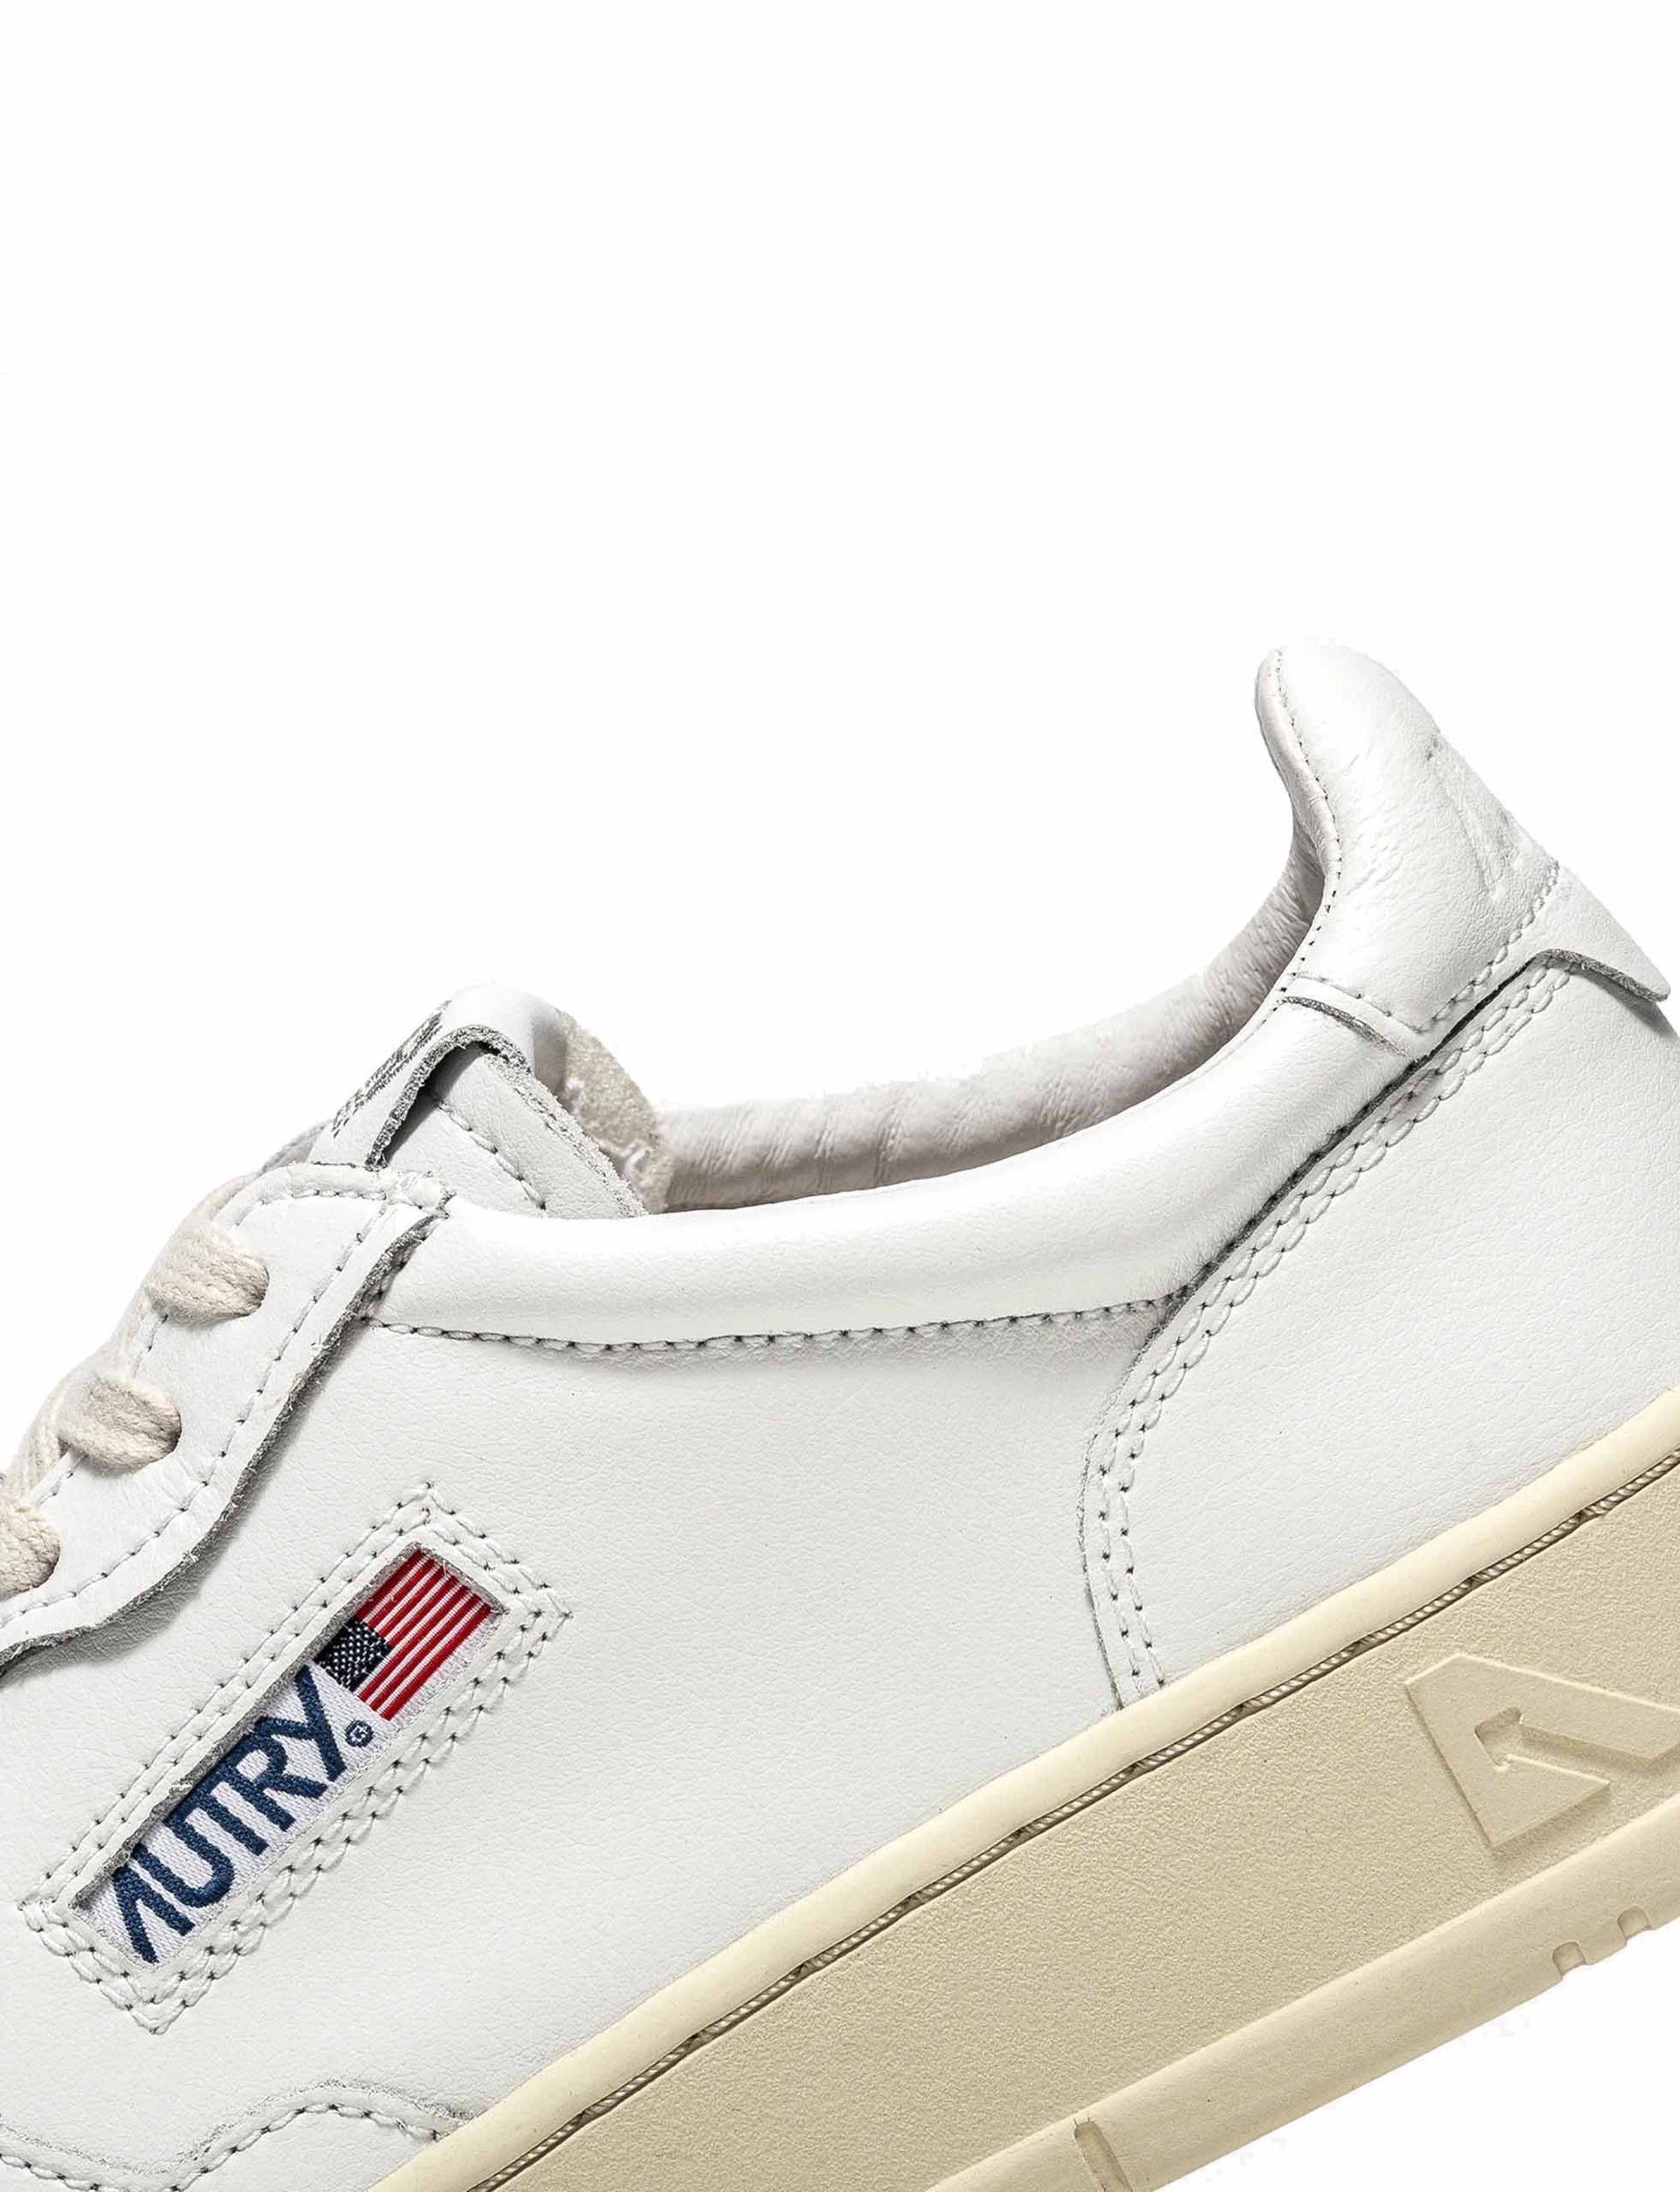 AUTRY SNEAKERS MAN MEDALIST LOW SNEAKERS IN LEATHER COLOR WHITE